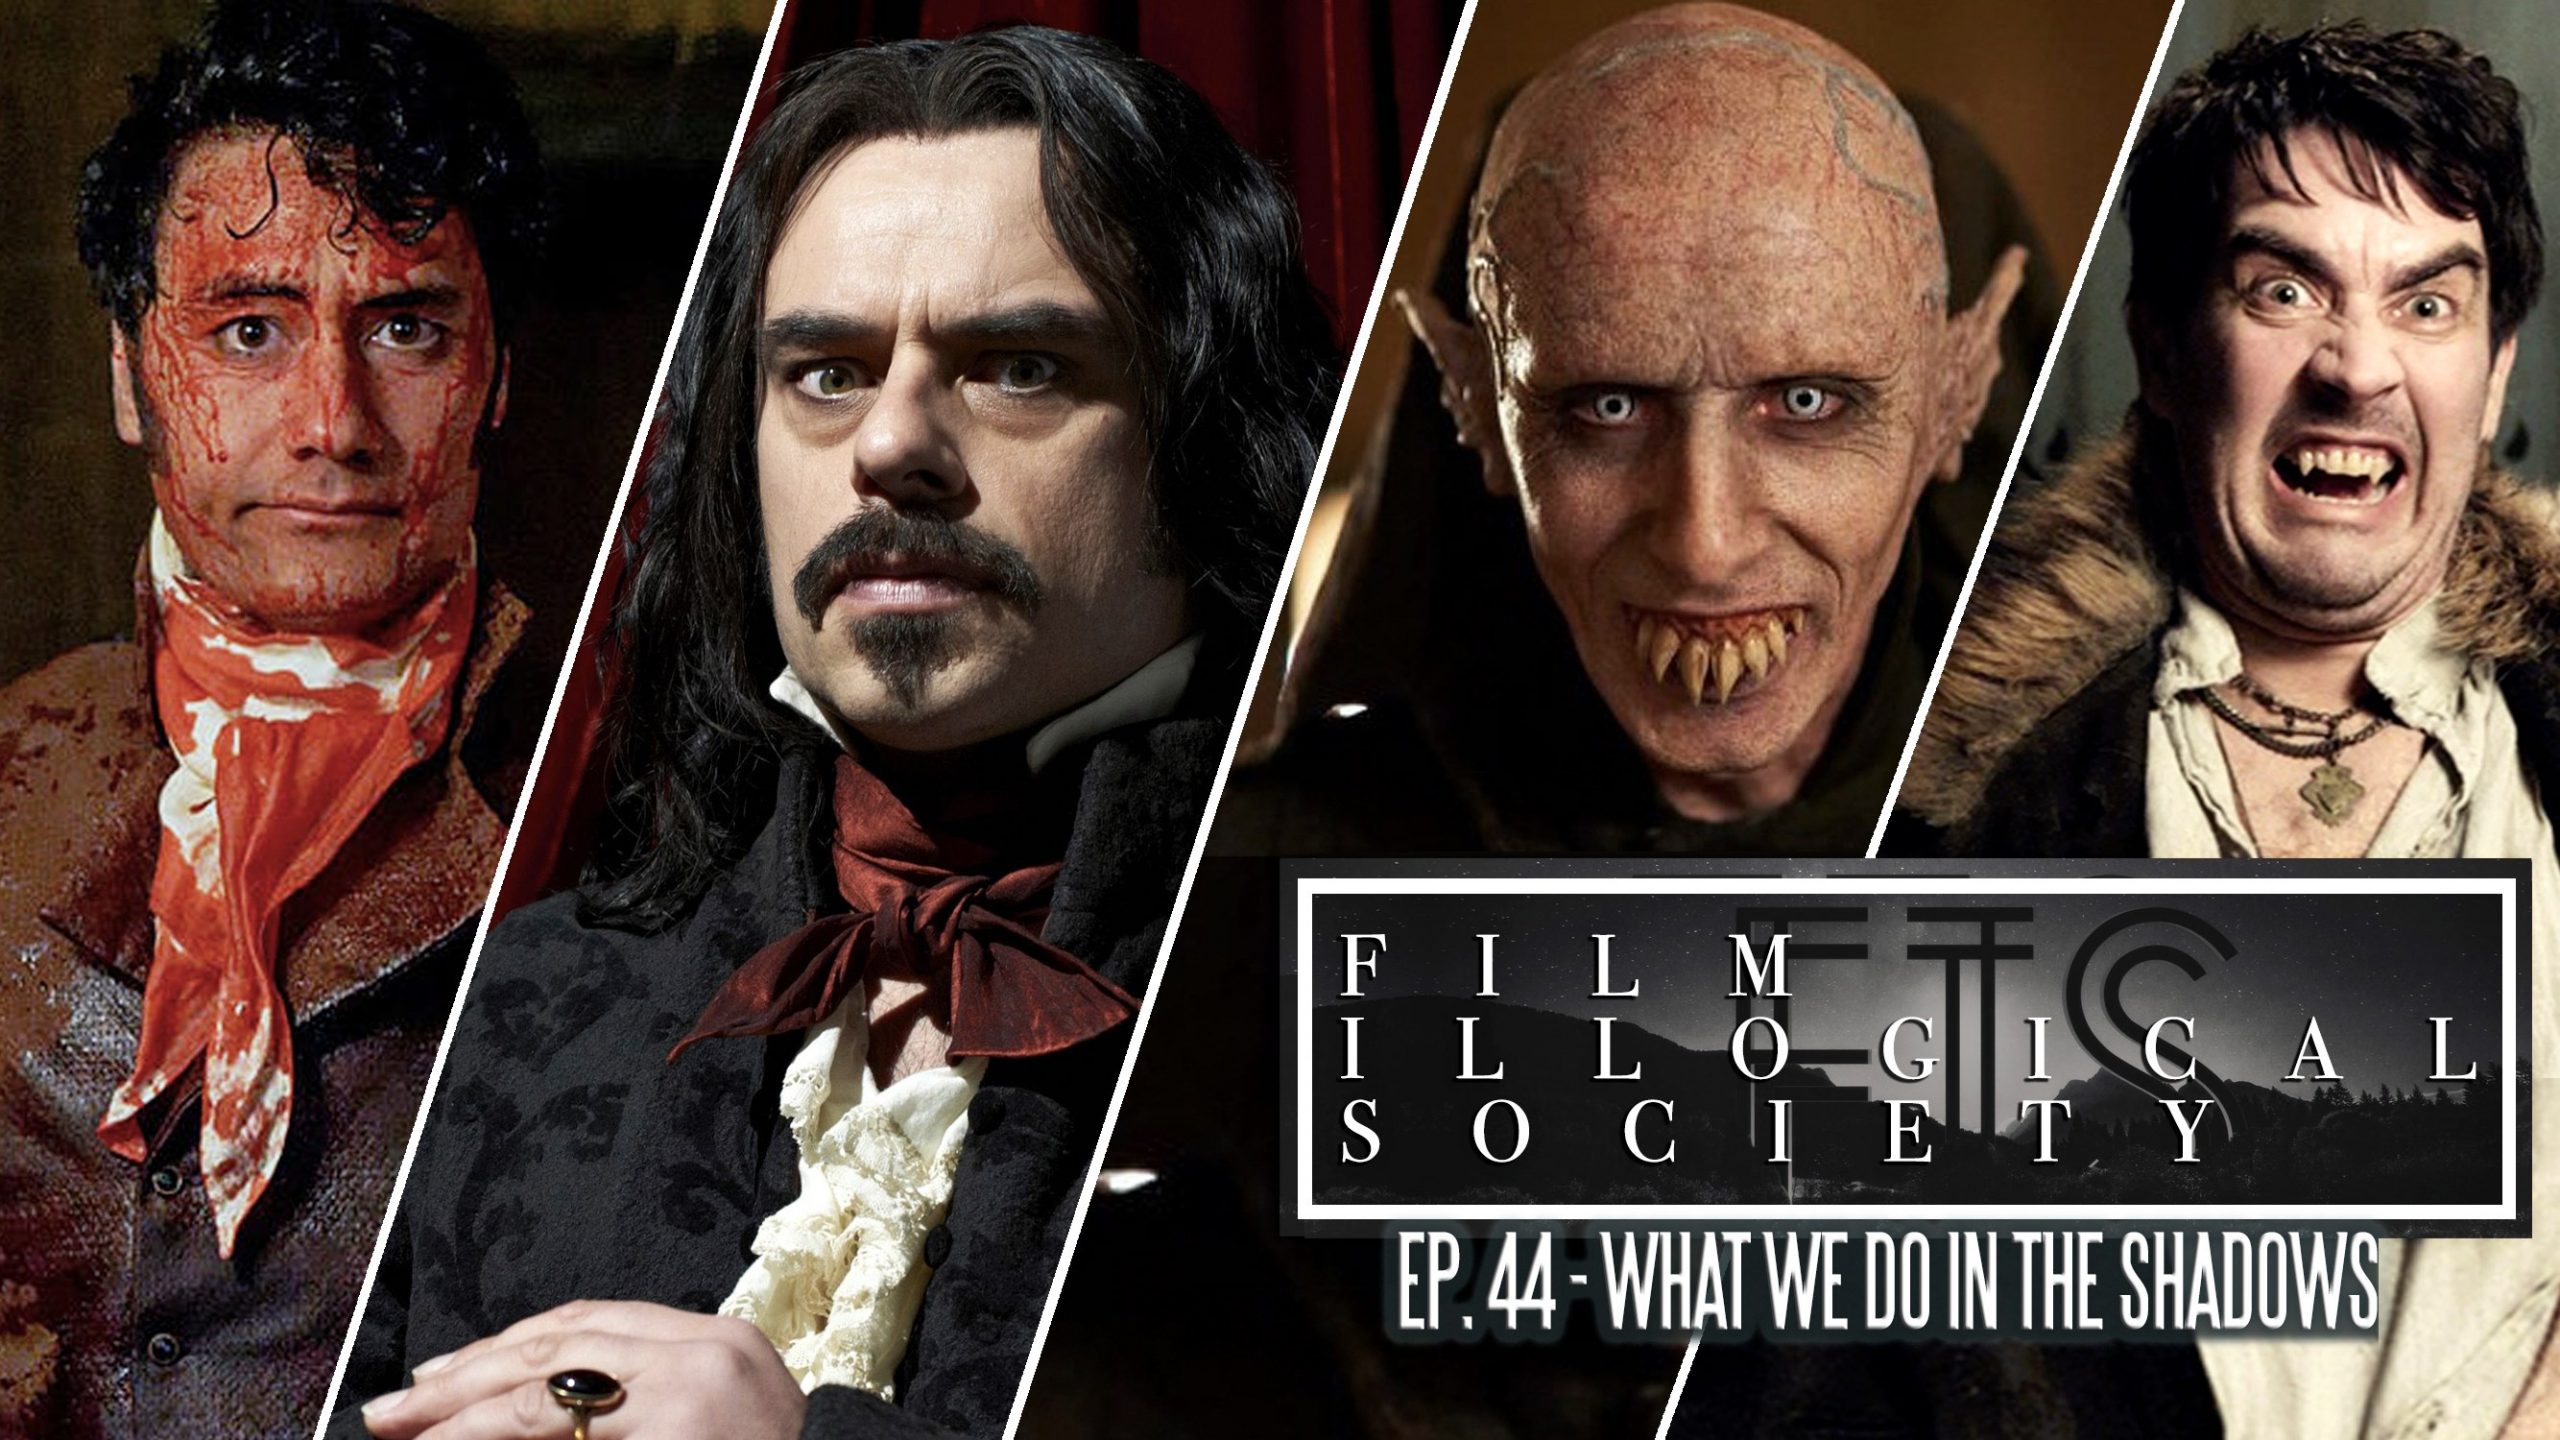 44 – What We Do in the Shadows